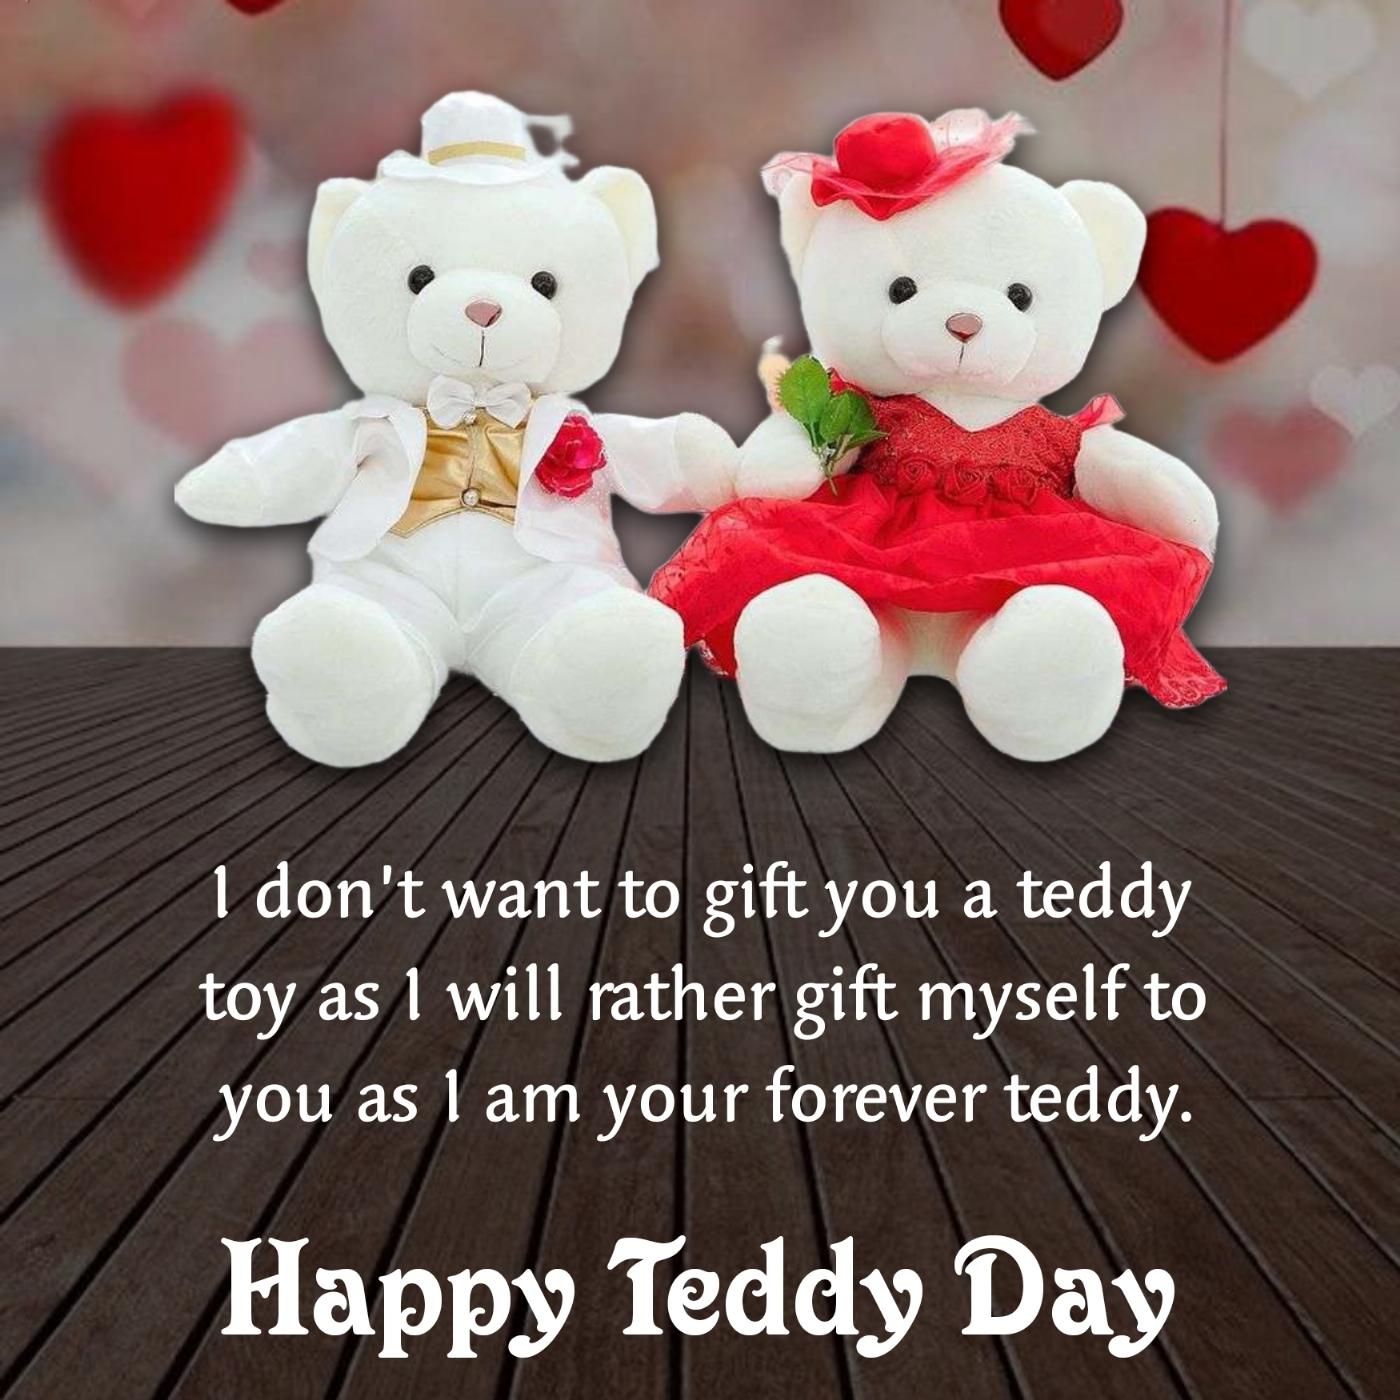 I dont want to gift you a teddy toy as I will rather gift myself